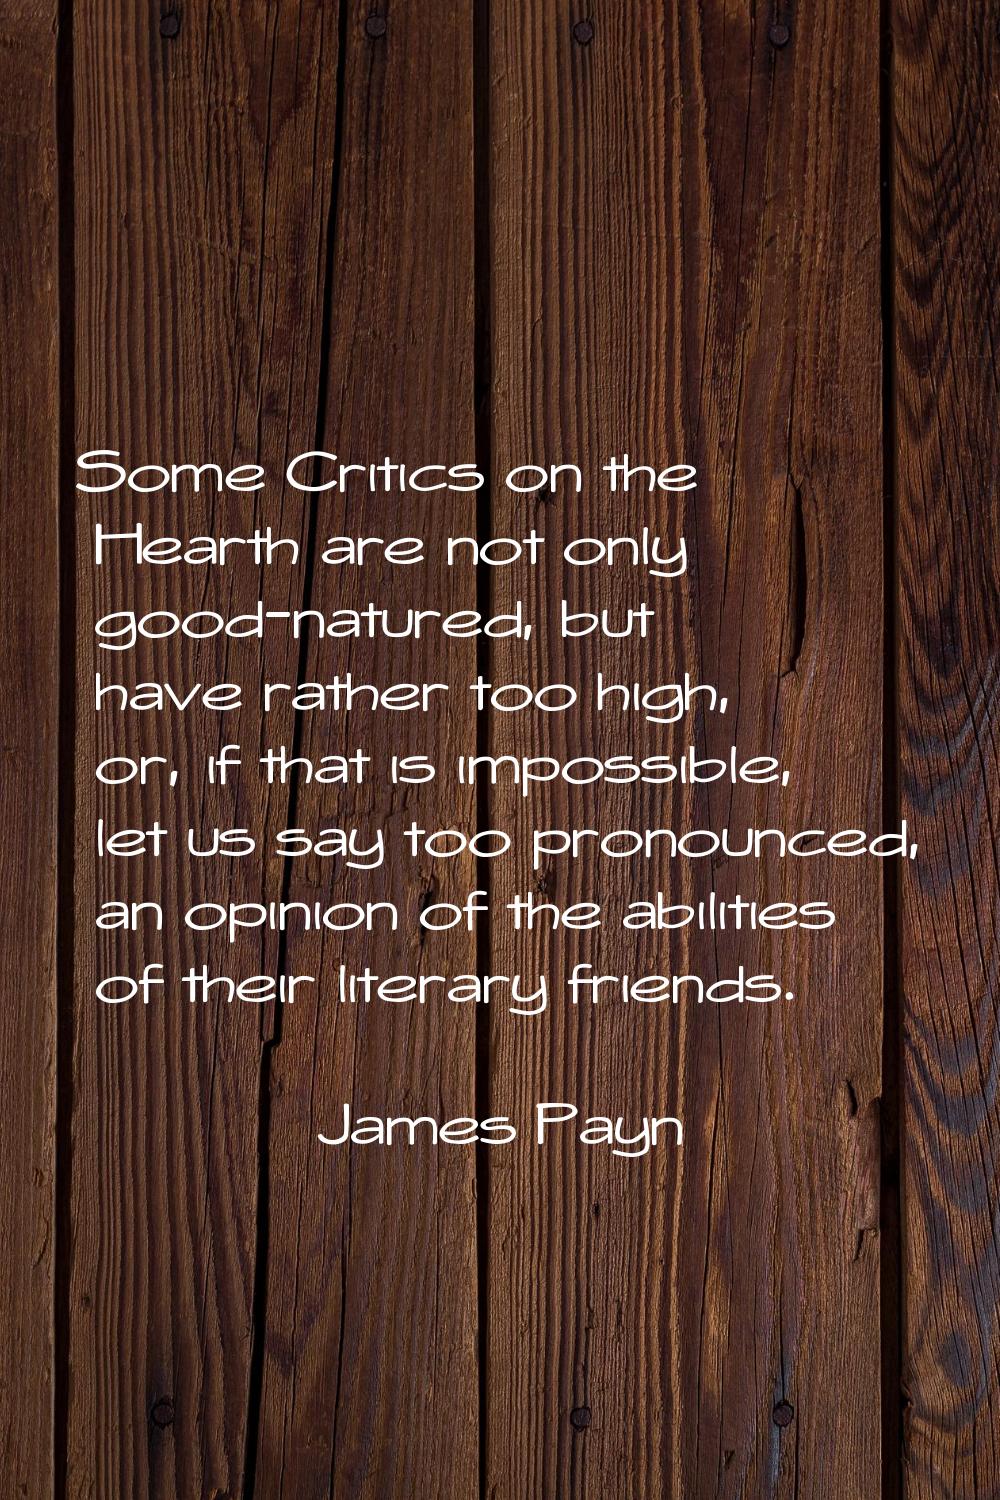 Some Critics on the Hearth are not only good-natured, but have rather too high, or, if that is impo